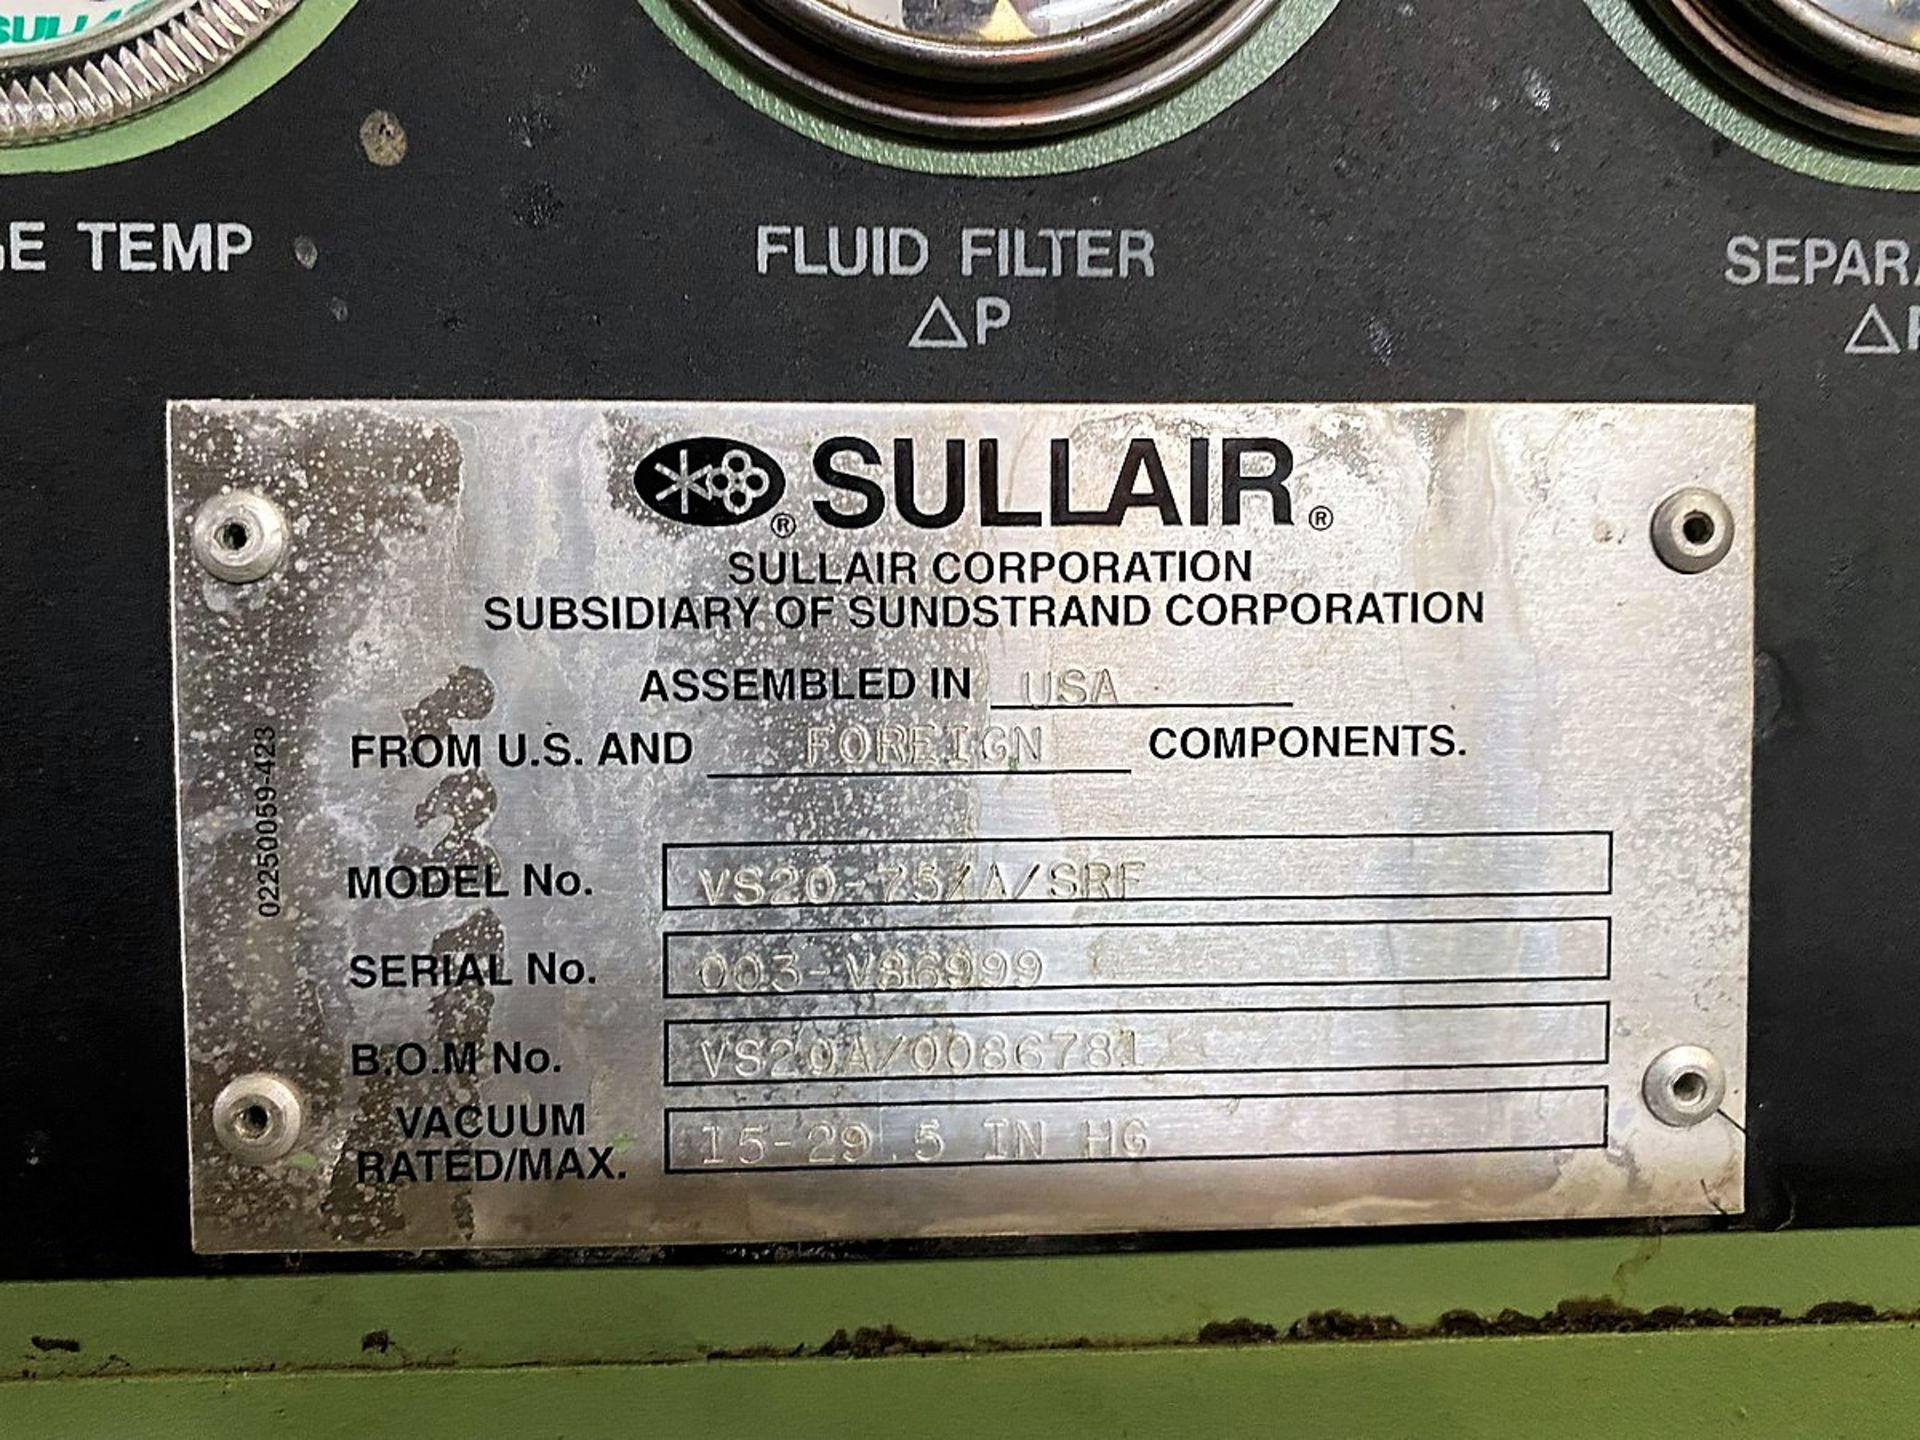 Sullair Model VS20-25/A/SRF Base Mount Rotary Screw Air Compressor   - Image 5 of 5